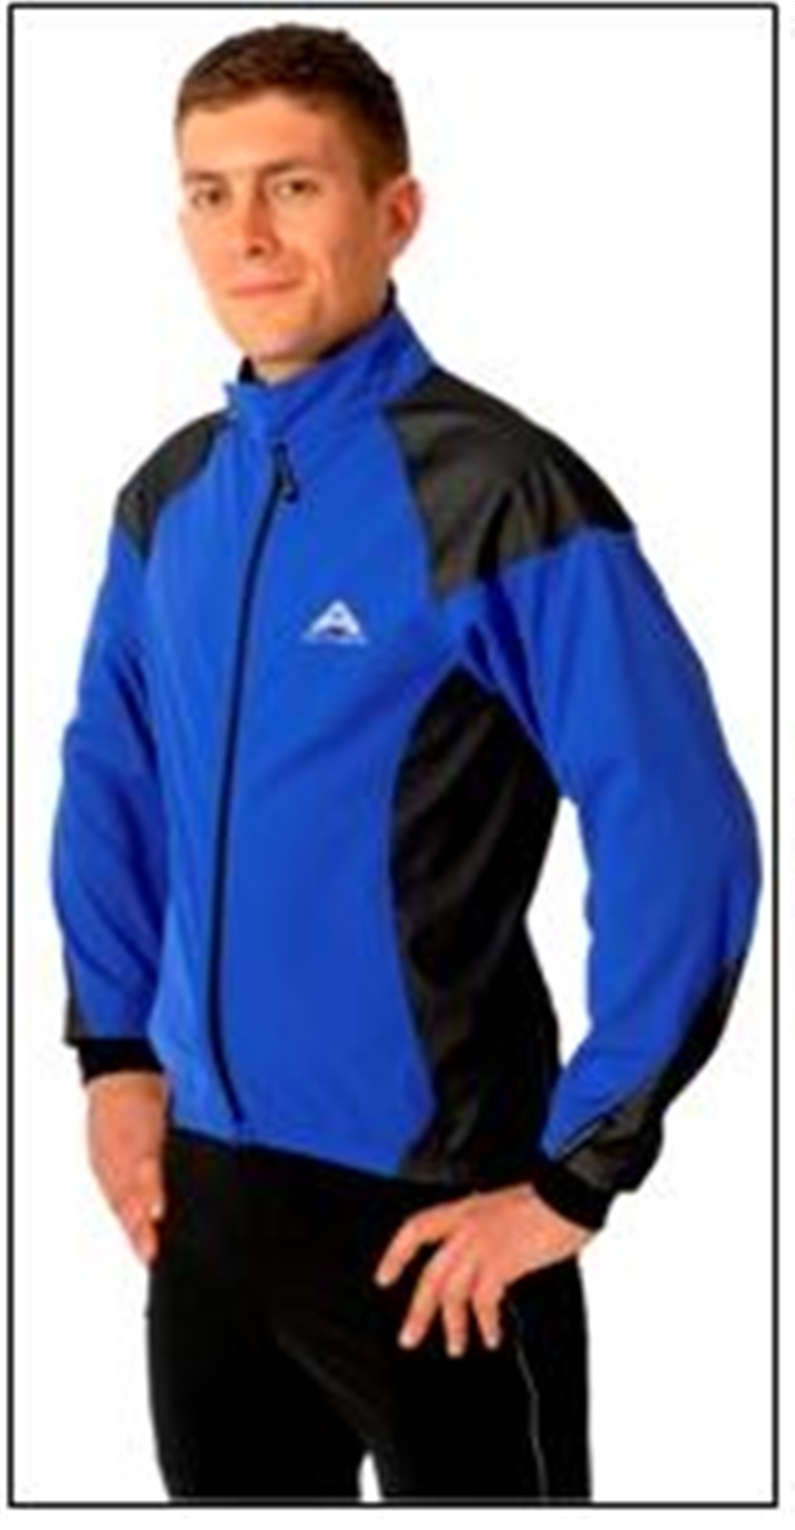 ALTURA’S HIGHEST PERFORMANCE 100% WINDPROOF SOFTSHELL HAS A STYLISH WRAPROUND RACING CUT WITH